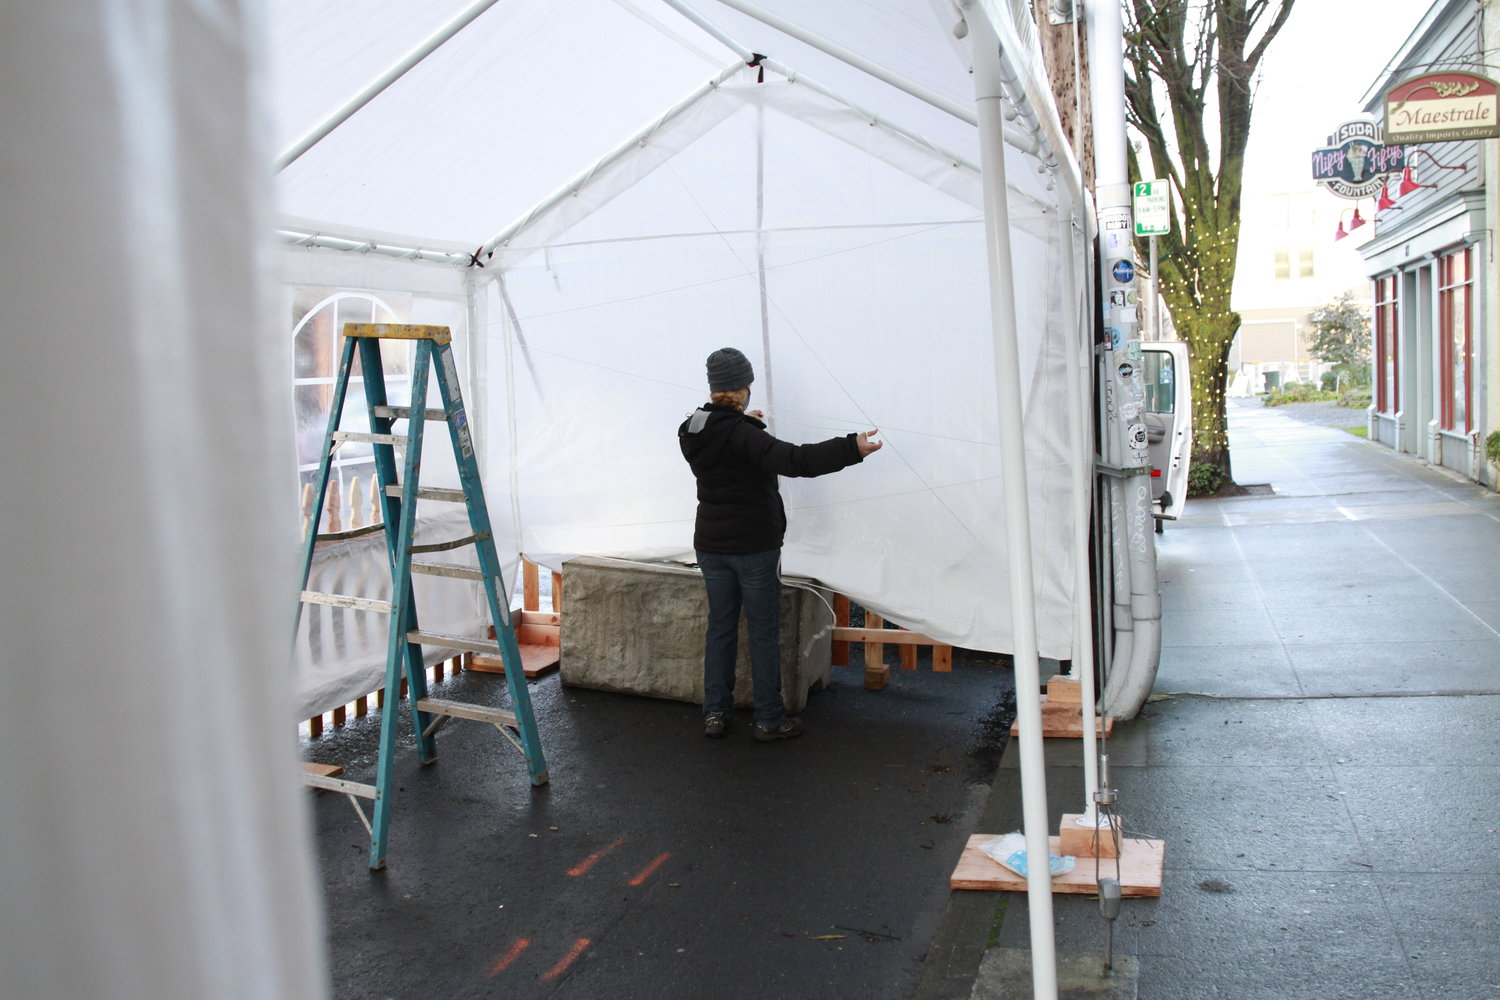 Kris Nelson, owner of several Port Townsend bars and restaurants, erects an outdoor dining shelter in front of Sirens on Water Street.